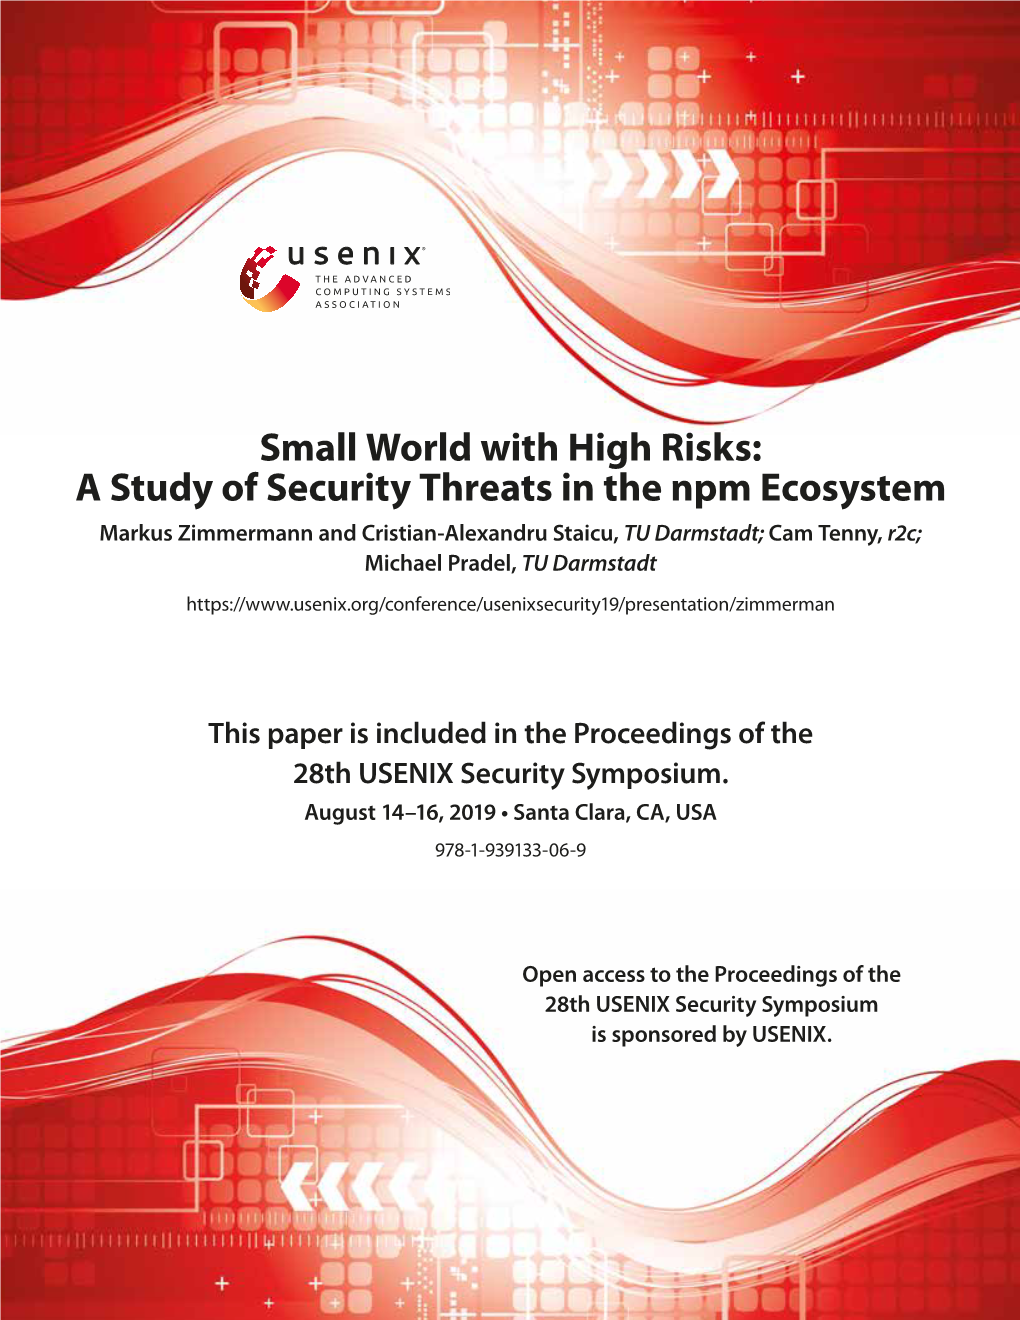 Small World with High Risks: a Study of Security Threats in The